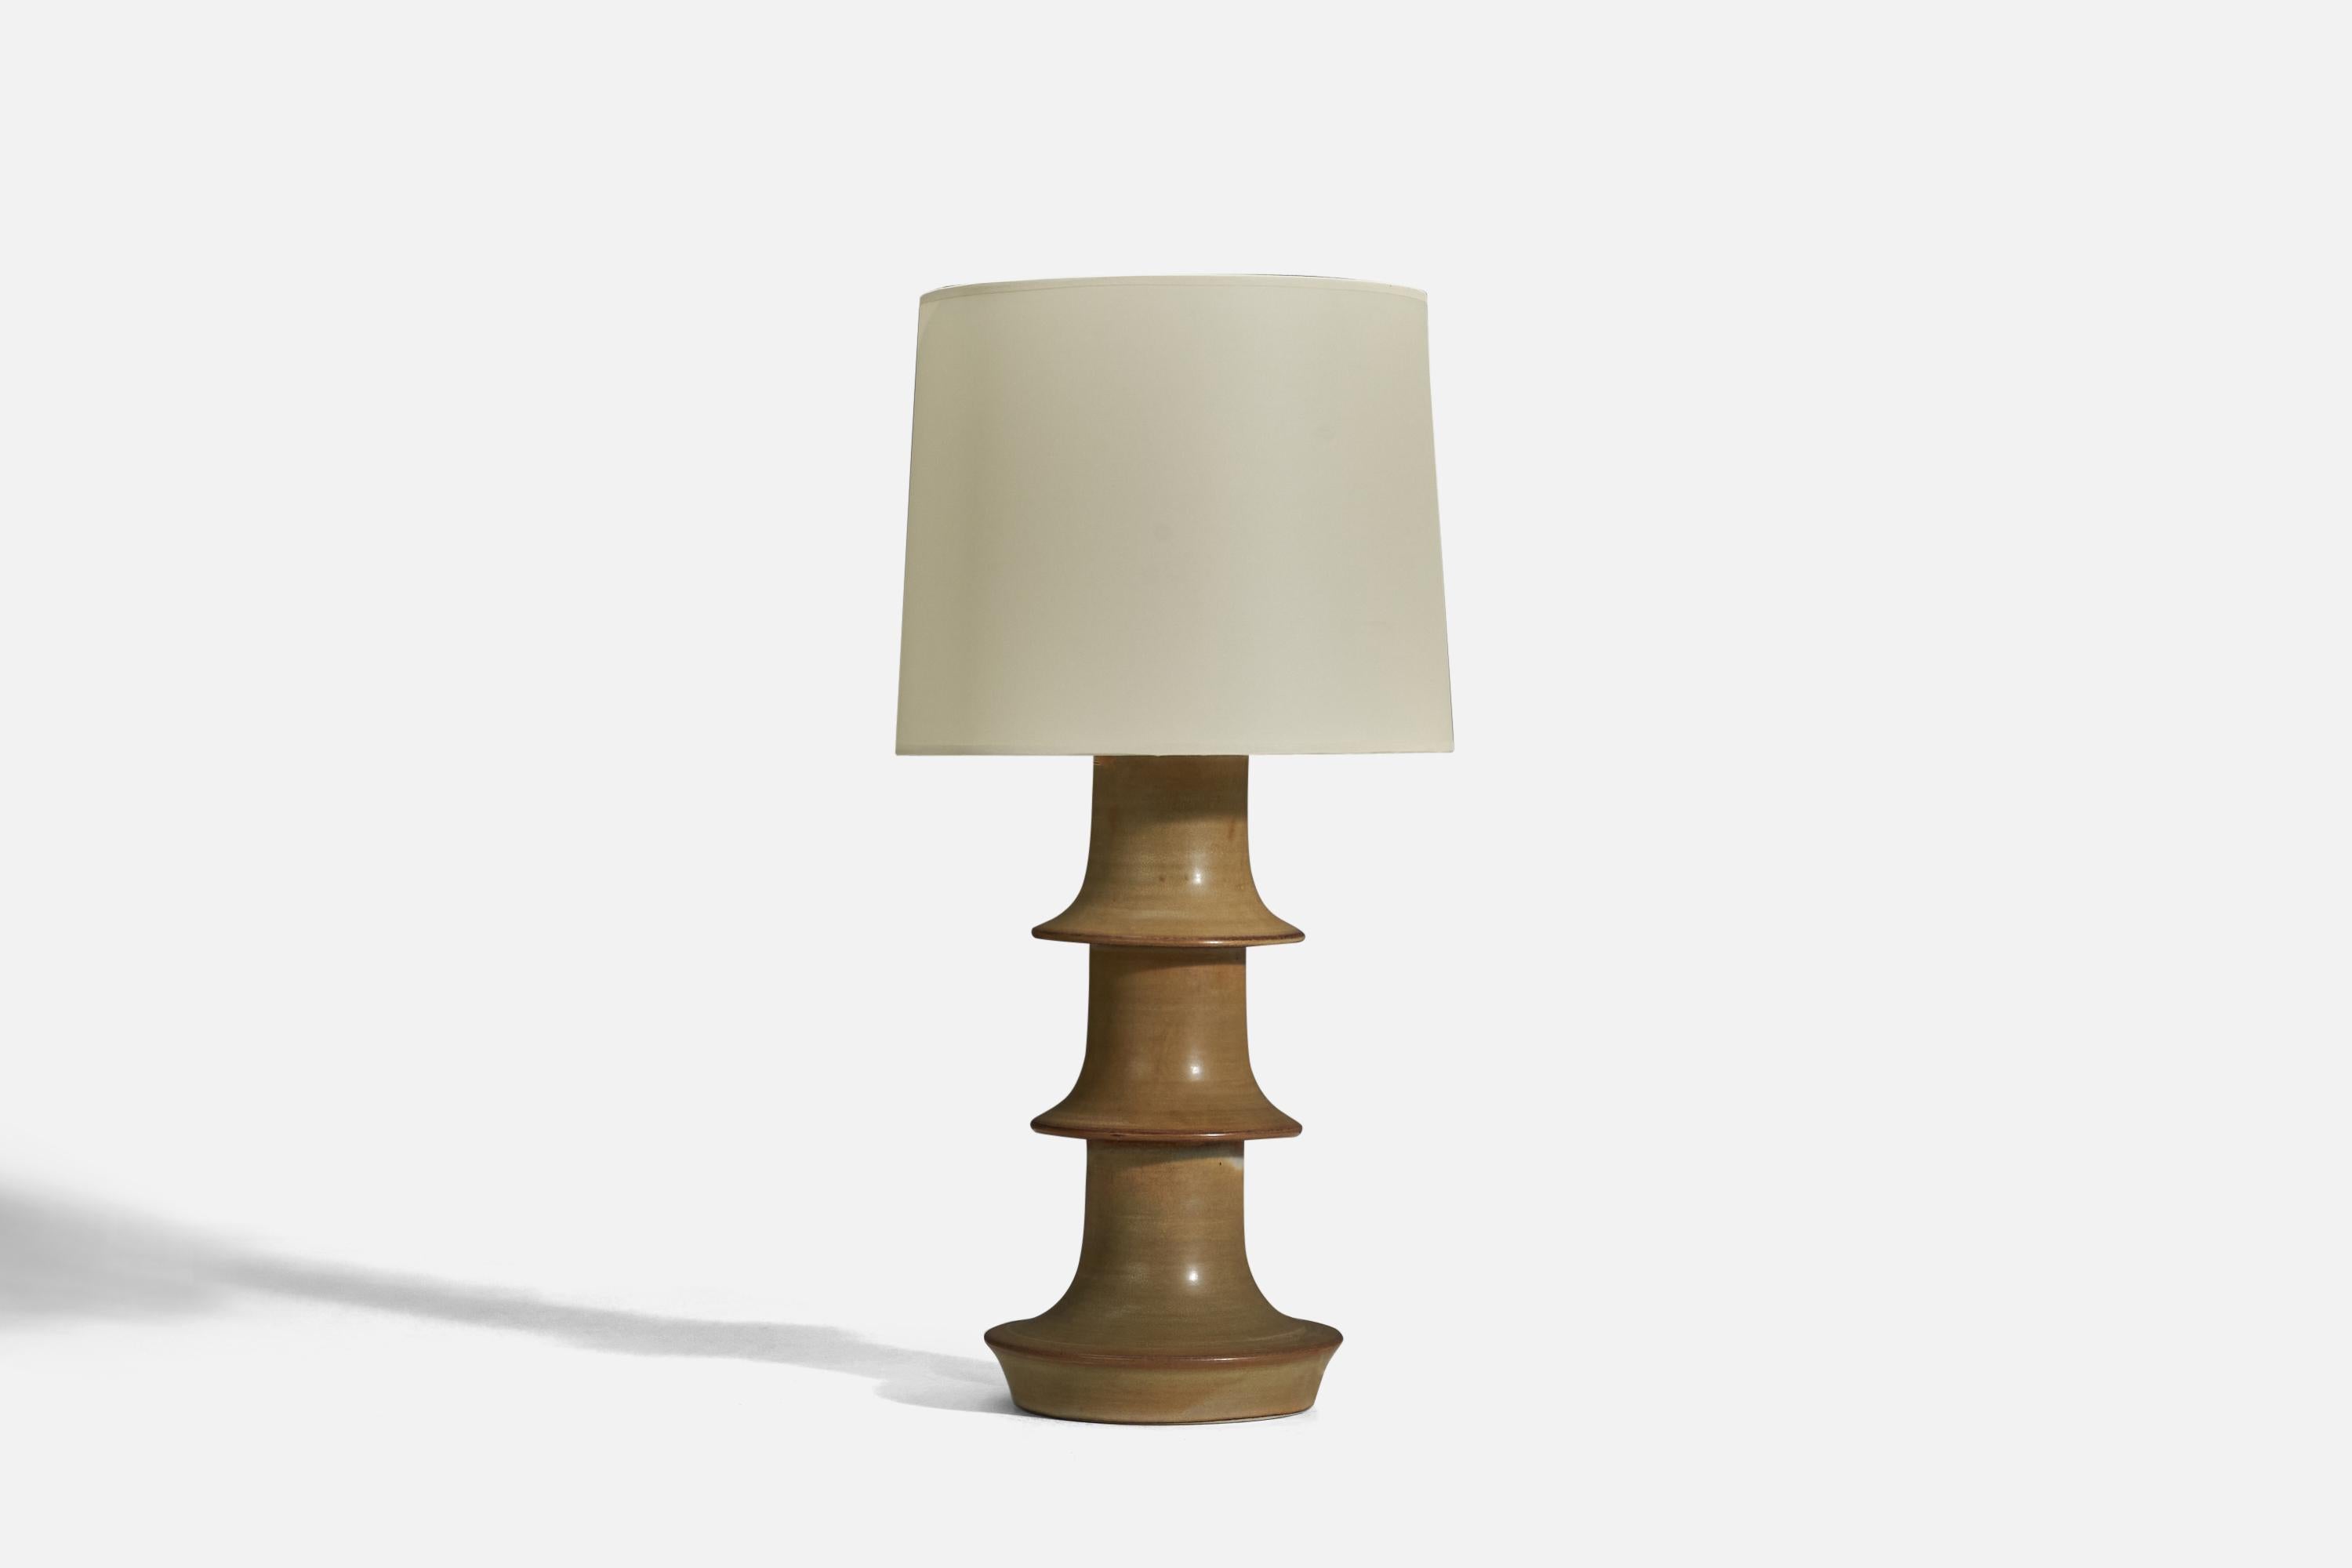 A brown glazed stoneware table lamp designed by Andersson & Johansson and produced by Höganäs, Sweden, 1950s.

Sold without Lampshade
Dimensions of Lamp (inches) : 14.68 x 6.5 x 6.5 (height x width x deepth)
Dimensions of Lampshade (inches) : 9